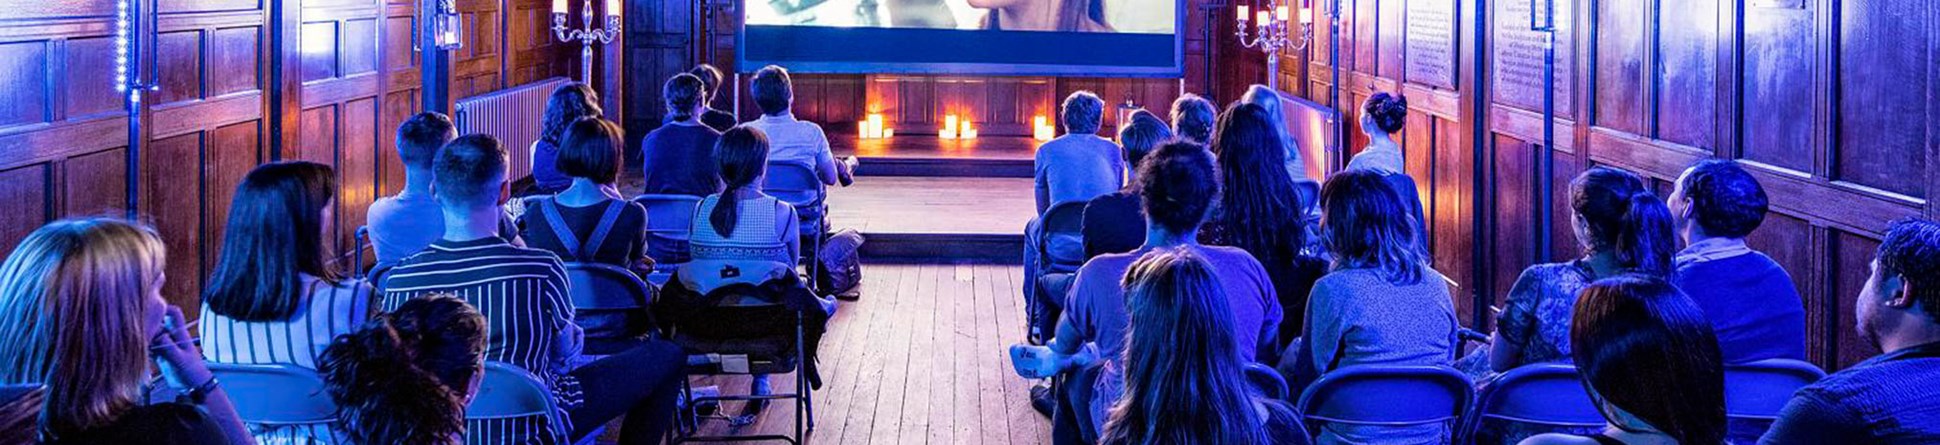 An audience watching a film in a wood-panelled hall with blue lighting and a large screen displaying a movie scene.